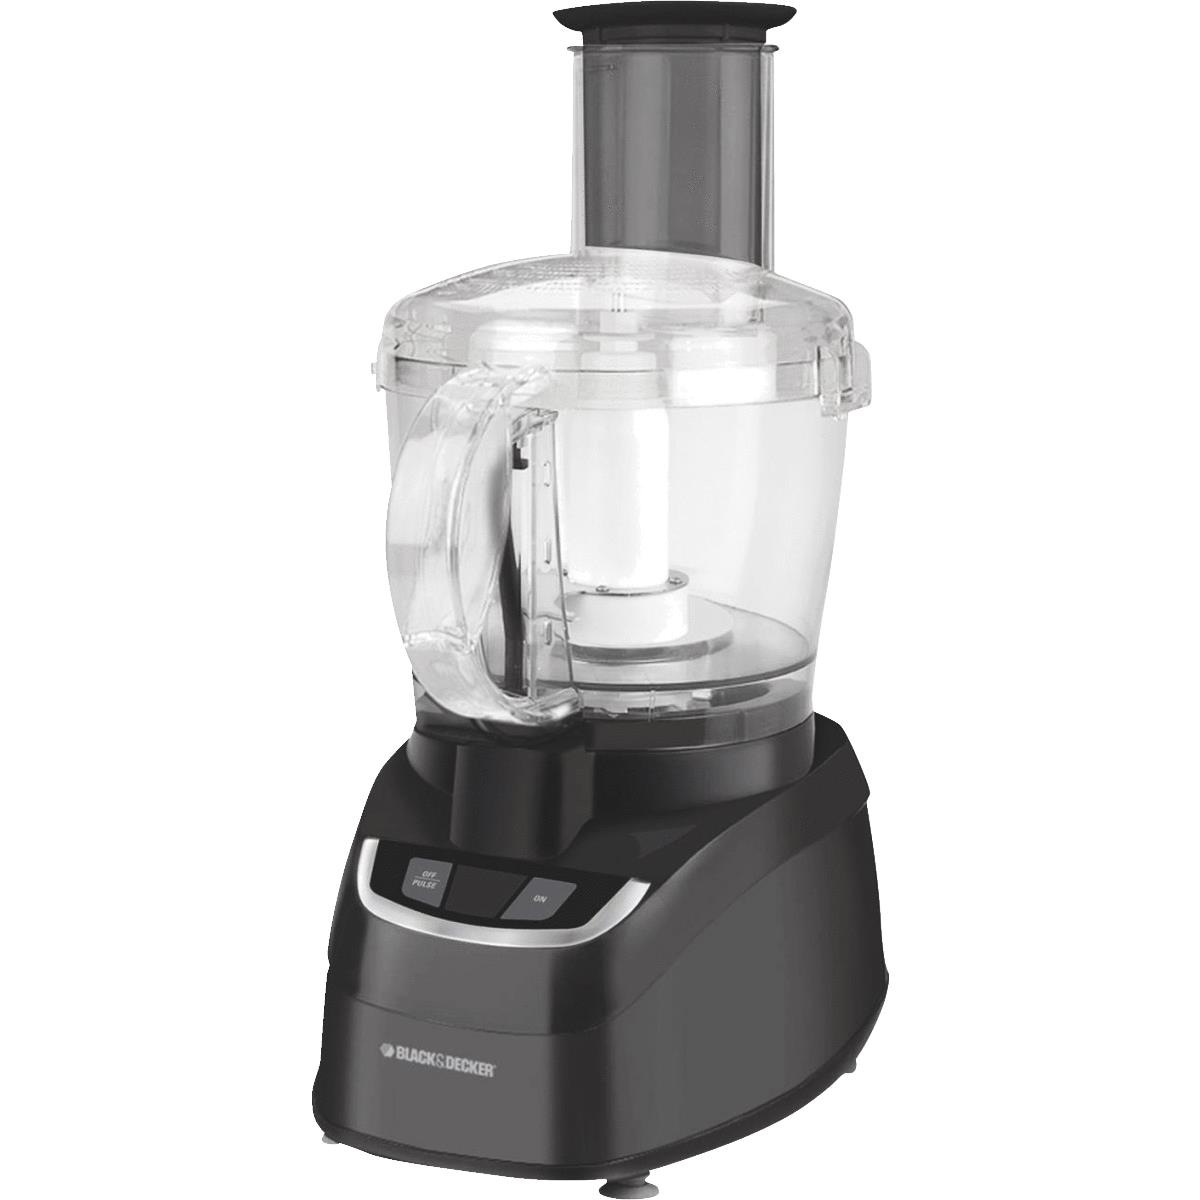 https://ak1.ostkcdn.com/images/products/is/images/direct/b89ce0965c531b01a79c33b1b2586ba1038ed683/Black-%26-Decker-Food-Processor.jpg